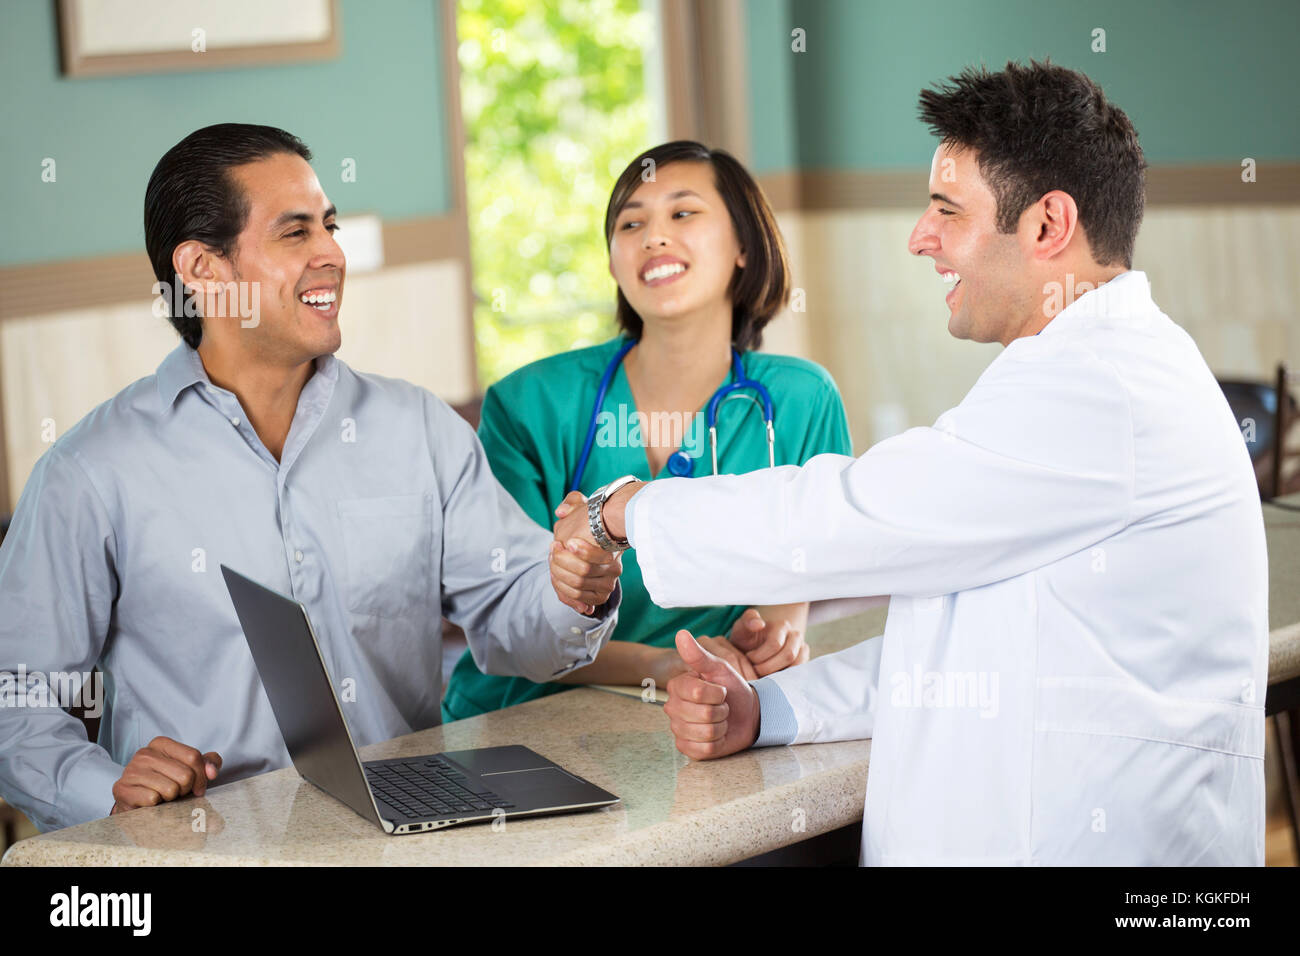 Medical team talking with patients. Stock Photo